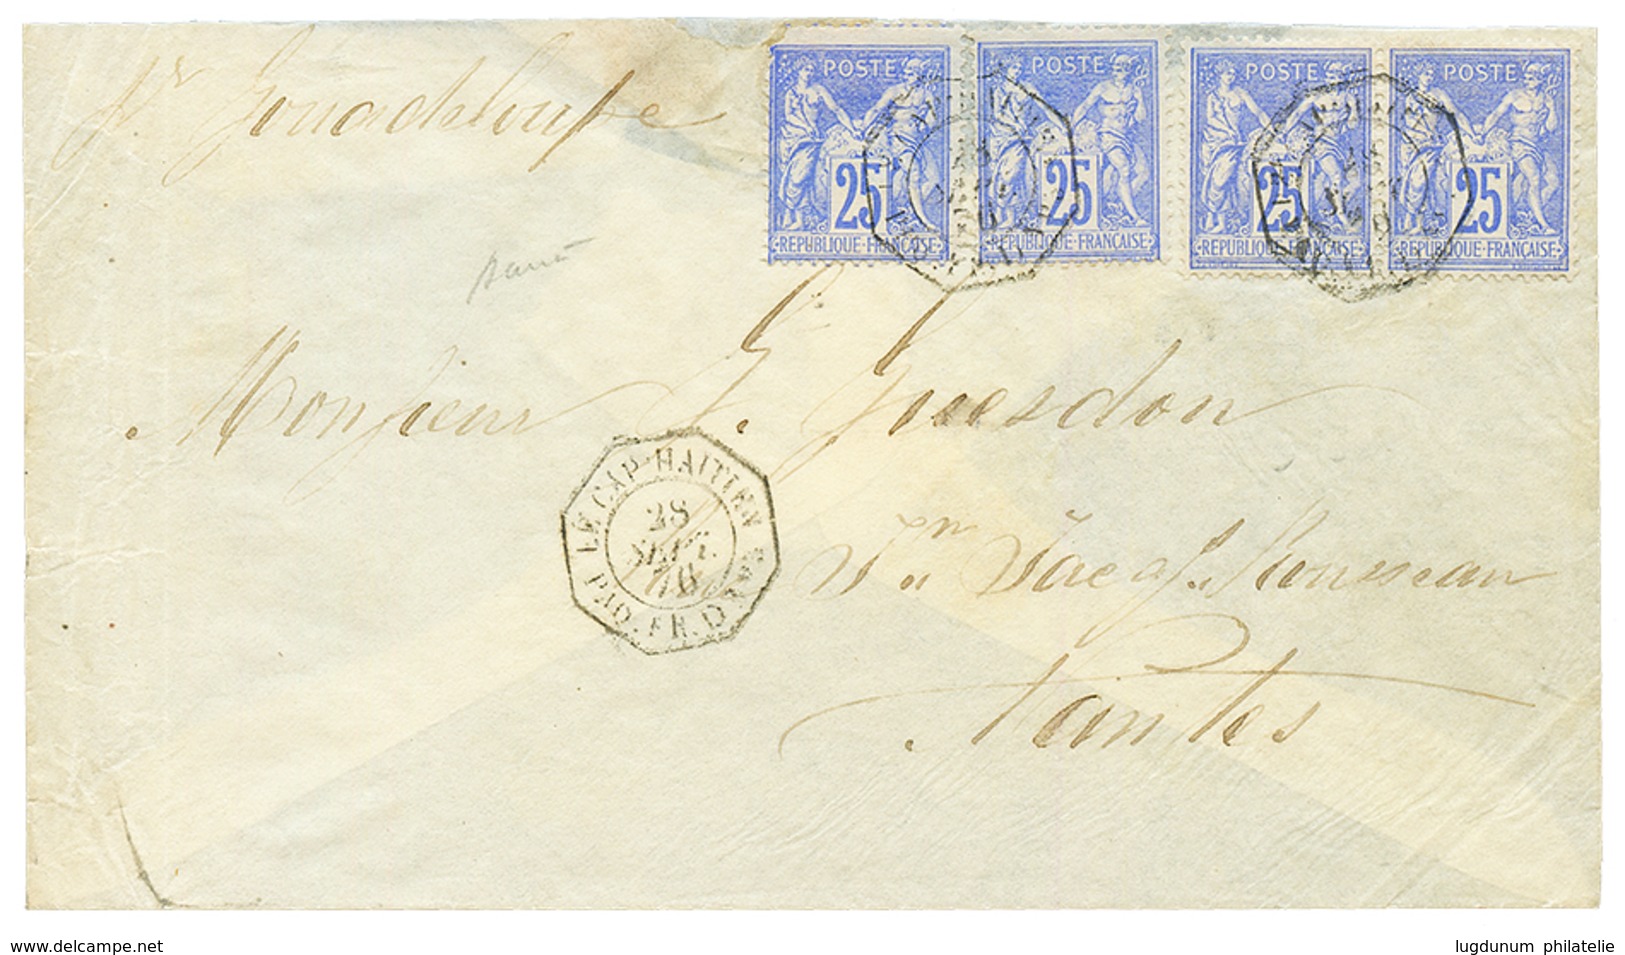 HAITI - MARITIME French Line : 1876 FRANCE 25c(x4) Canc. LE CAP-HAITIEN PAQ FR. D On Envelope To FRANCE. 1 Stamp With Sm - Haïti